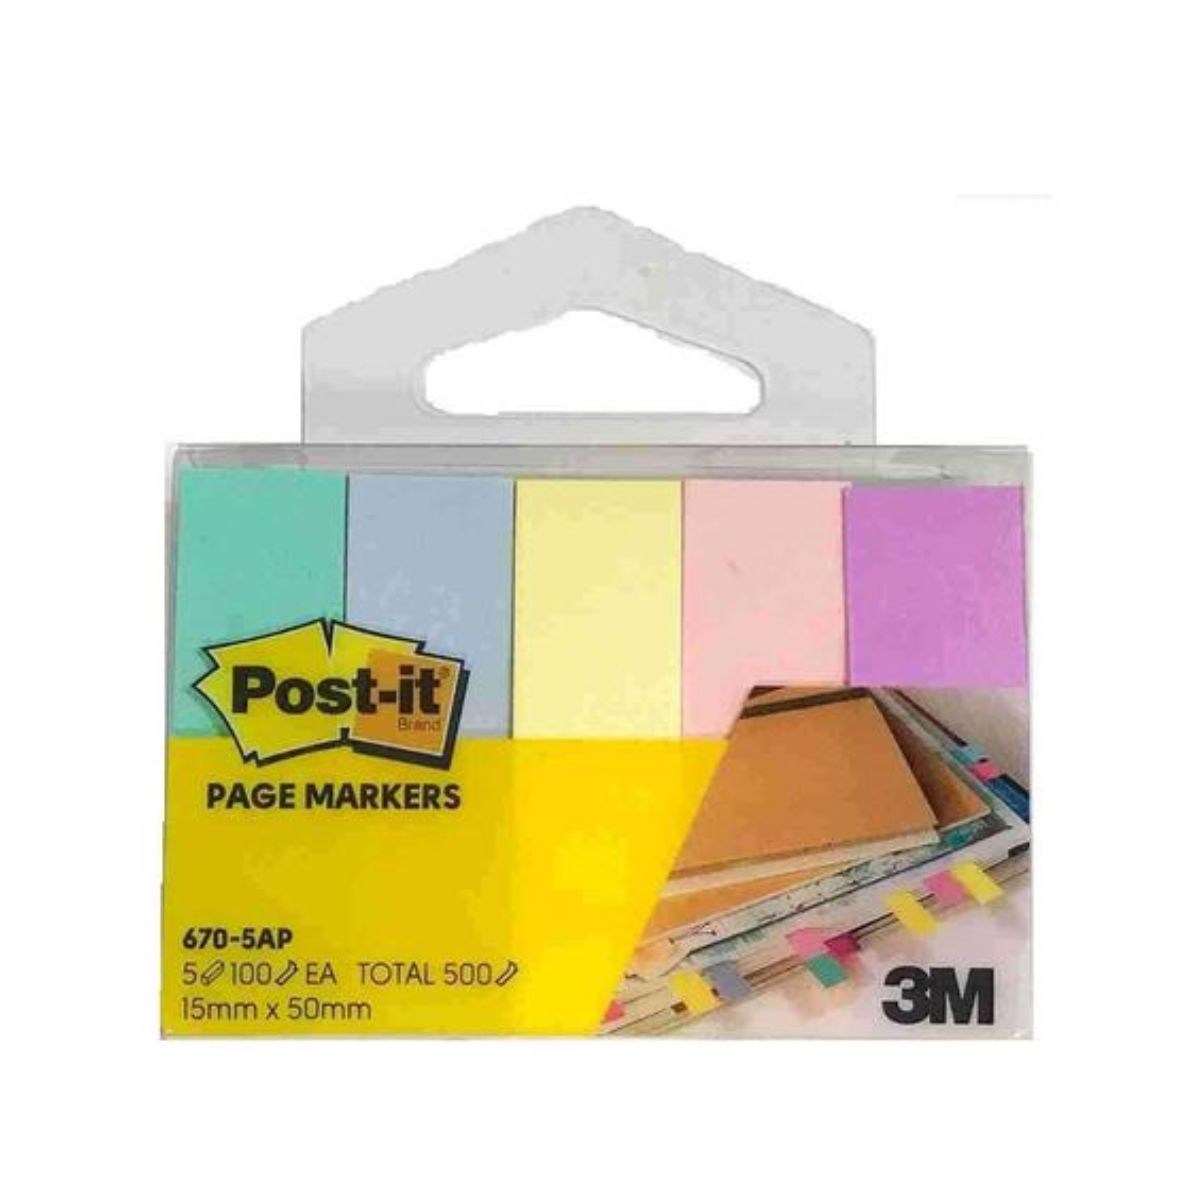 3M Post-it 3M Post-it Page Marker, Merseille, 15 mm X 50 mm, 5 Pads/Pack